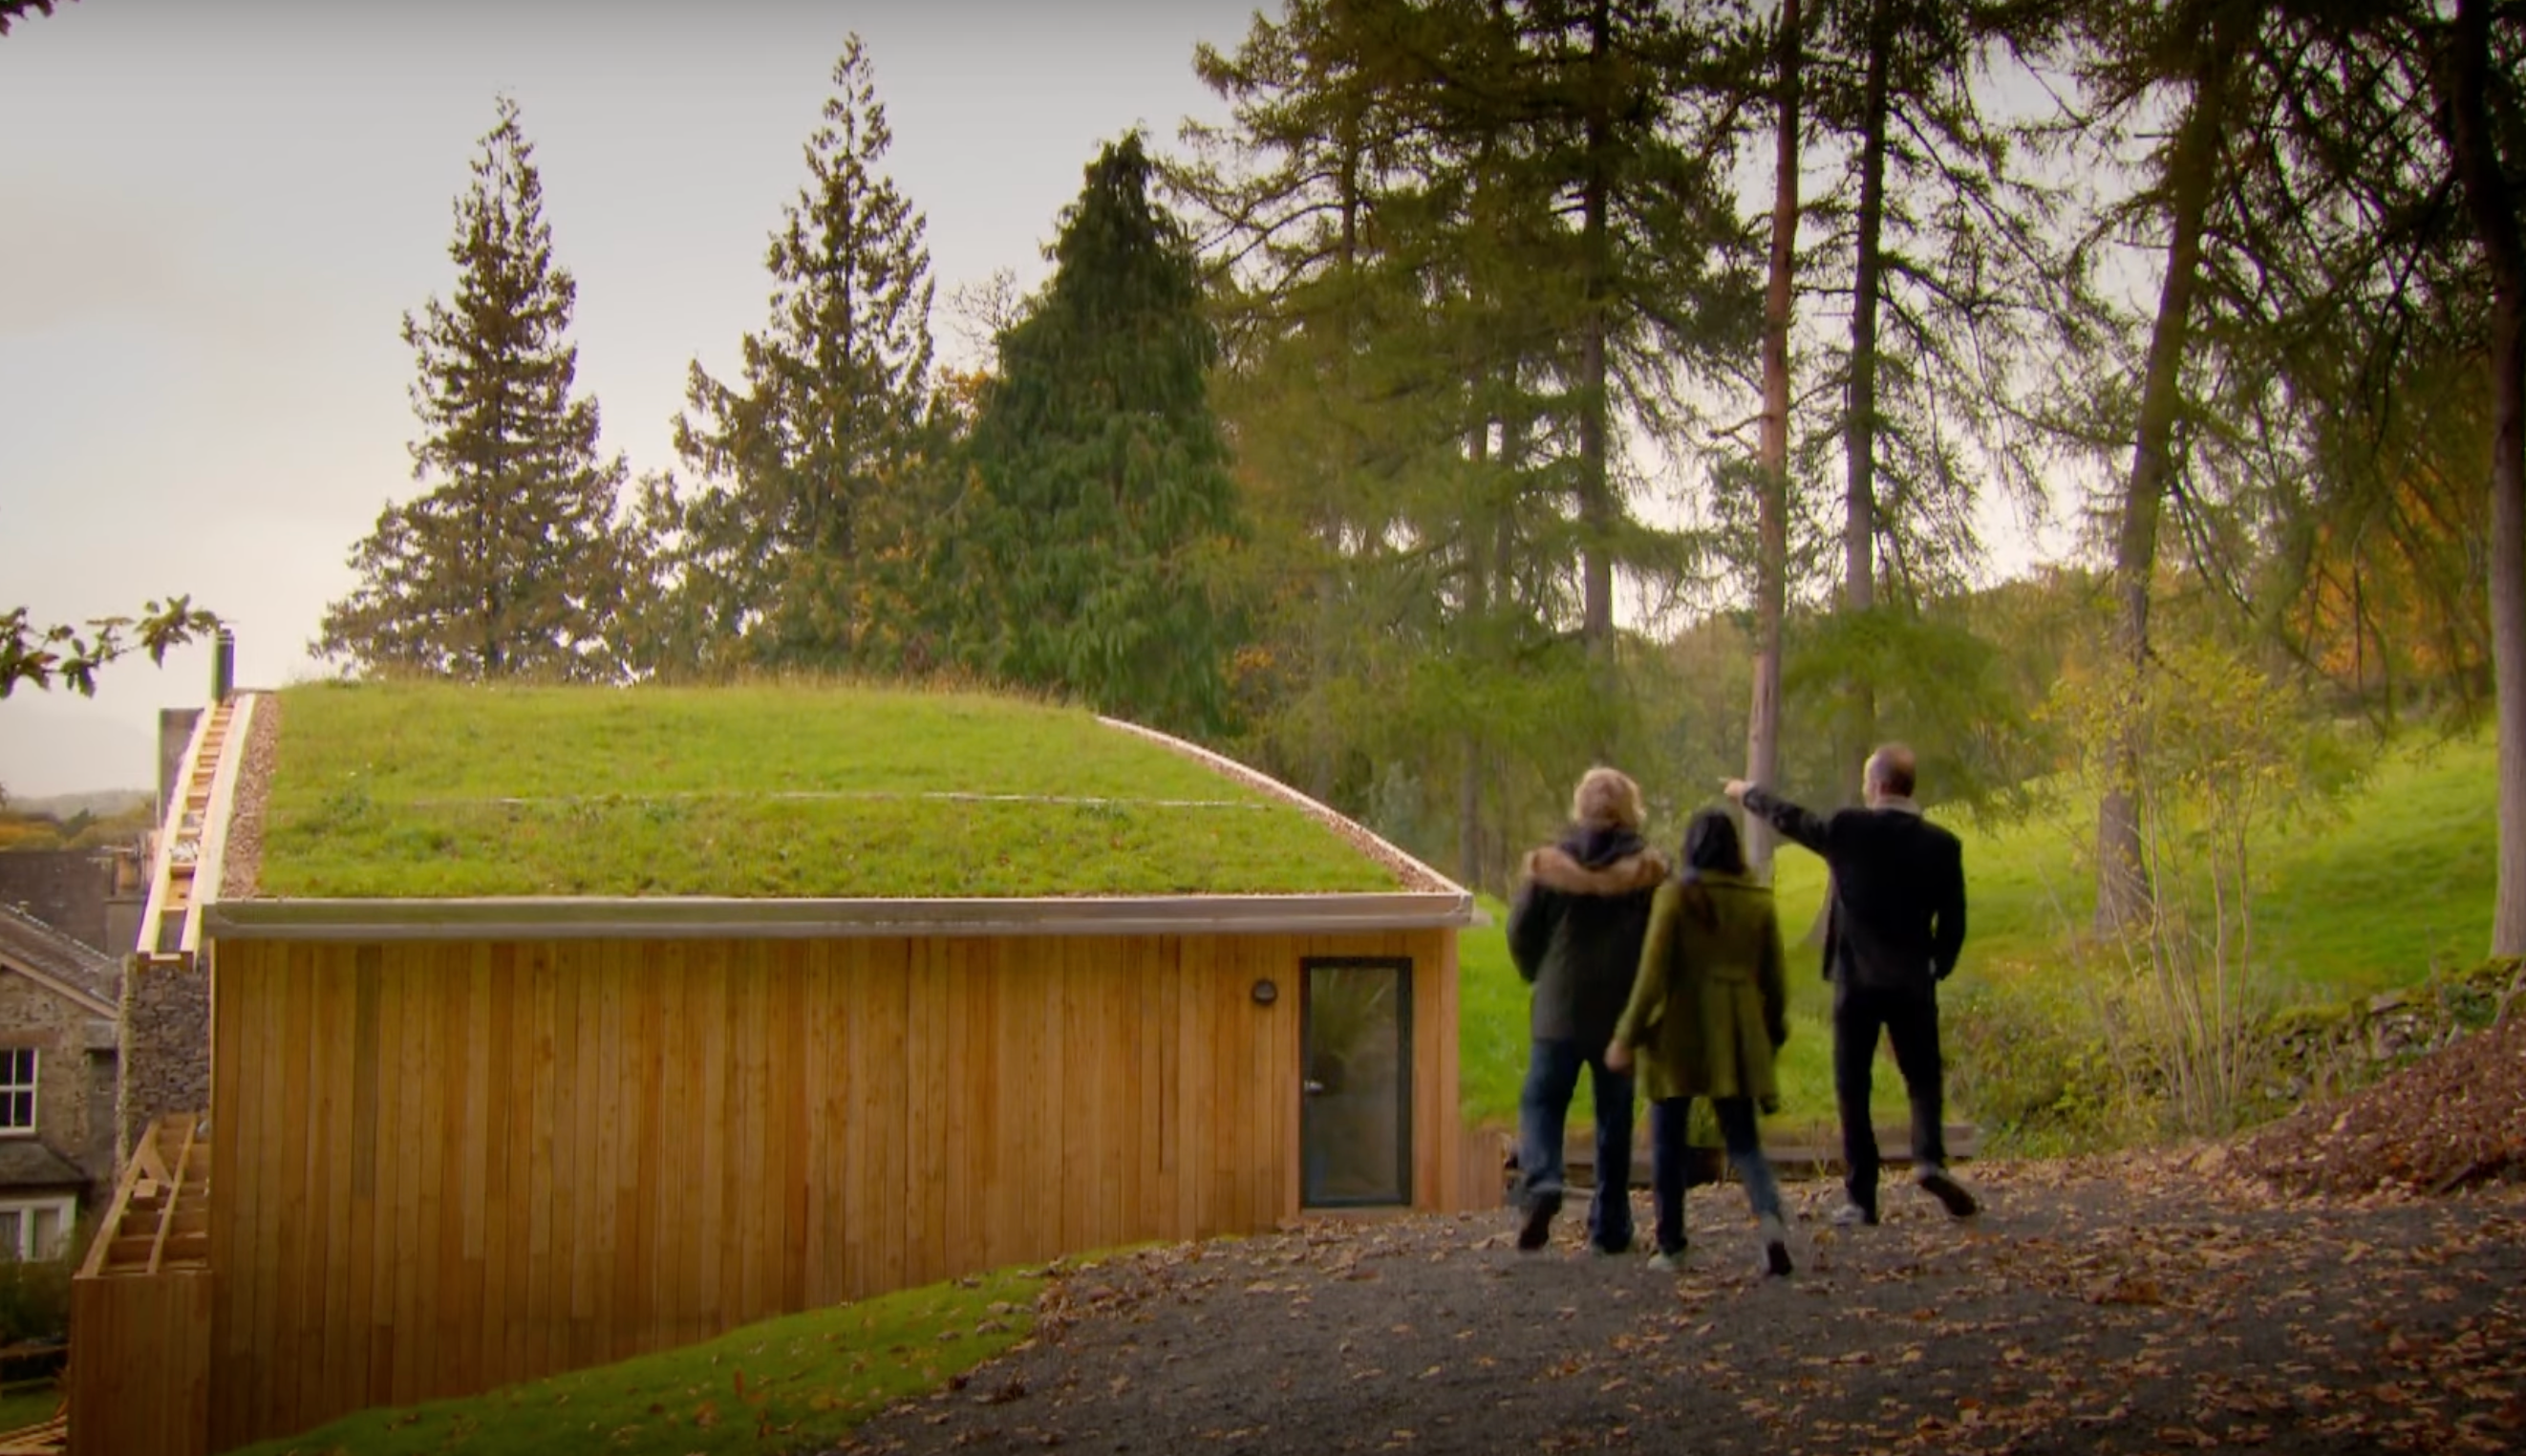 An eco roof helps the house blend into its surroundings